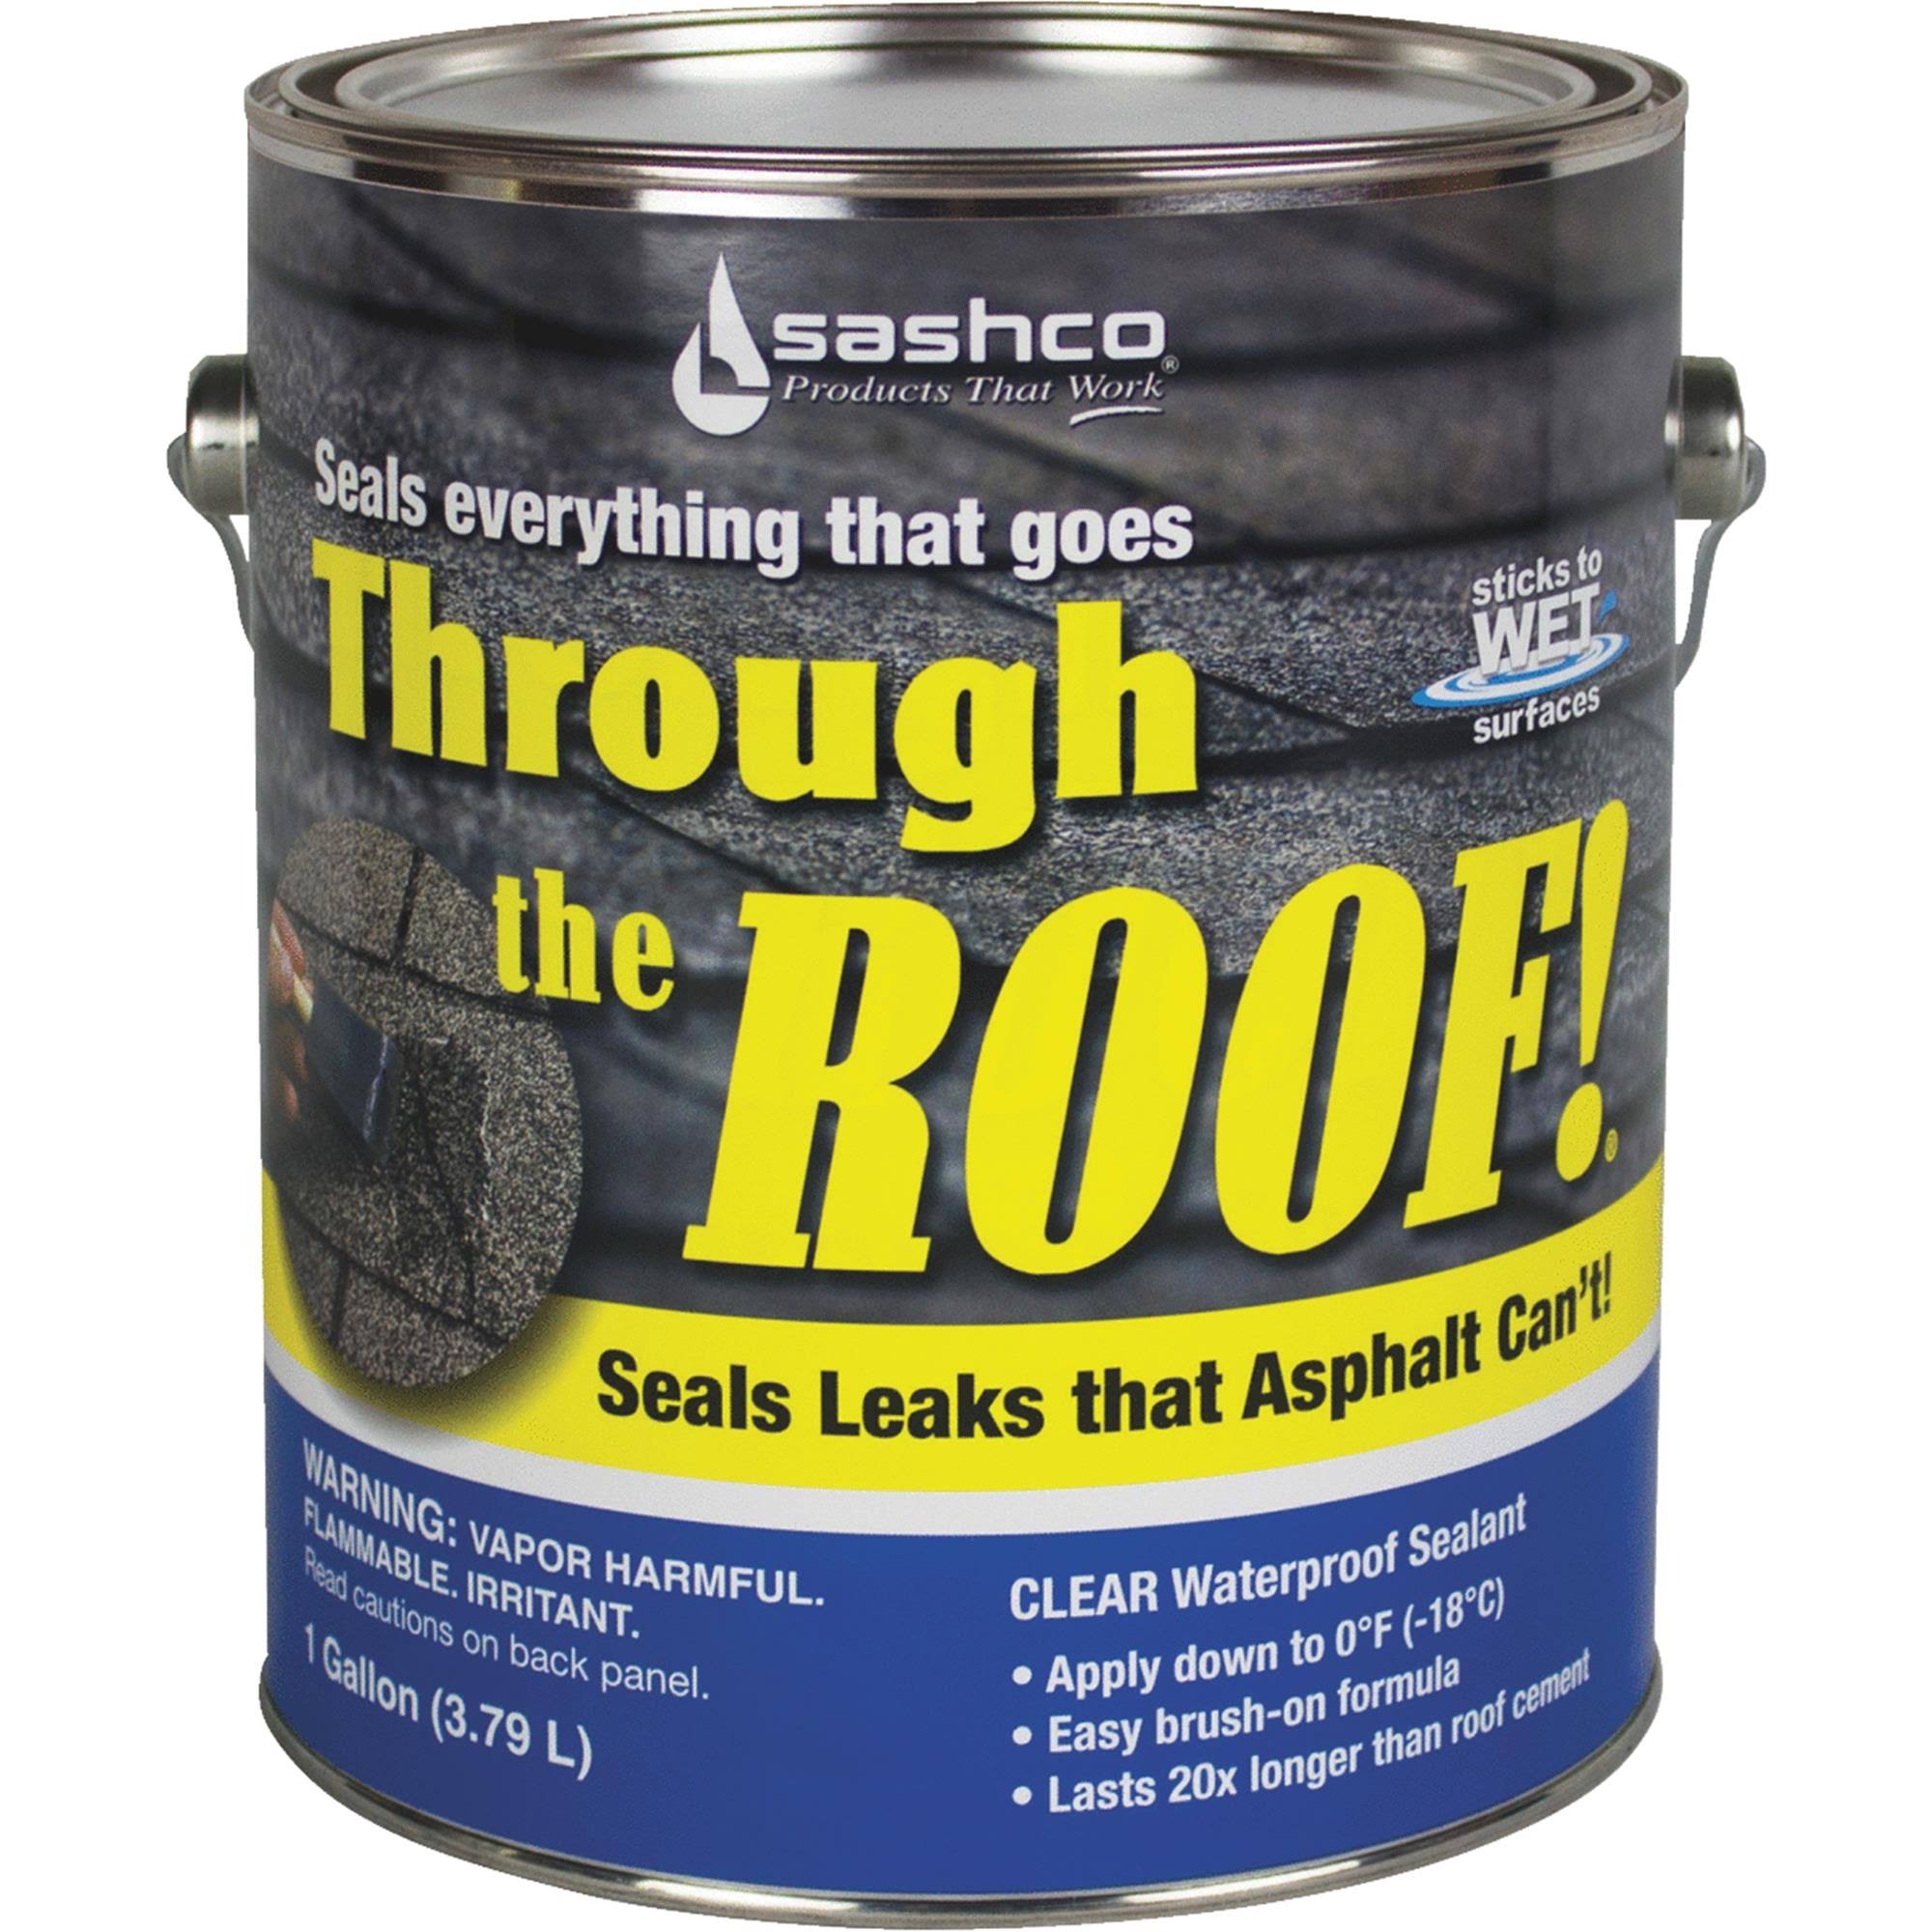 Sashco Through The Roof Water Proof Sealant - Clear, 1 Gallon